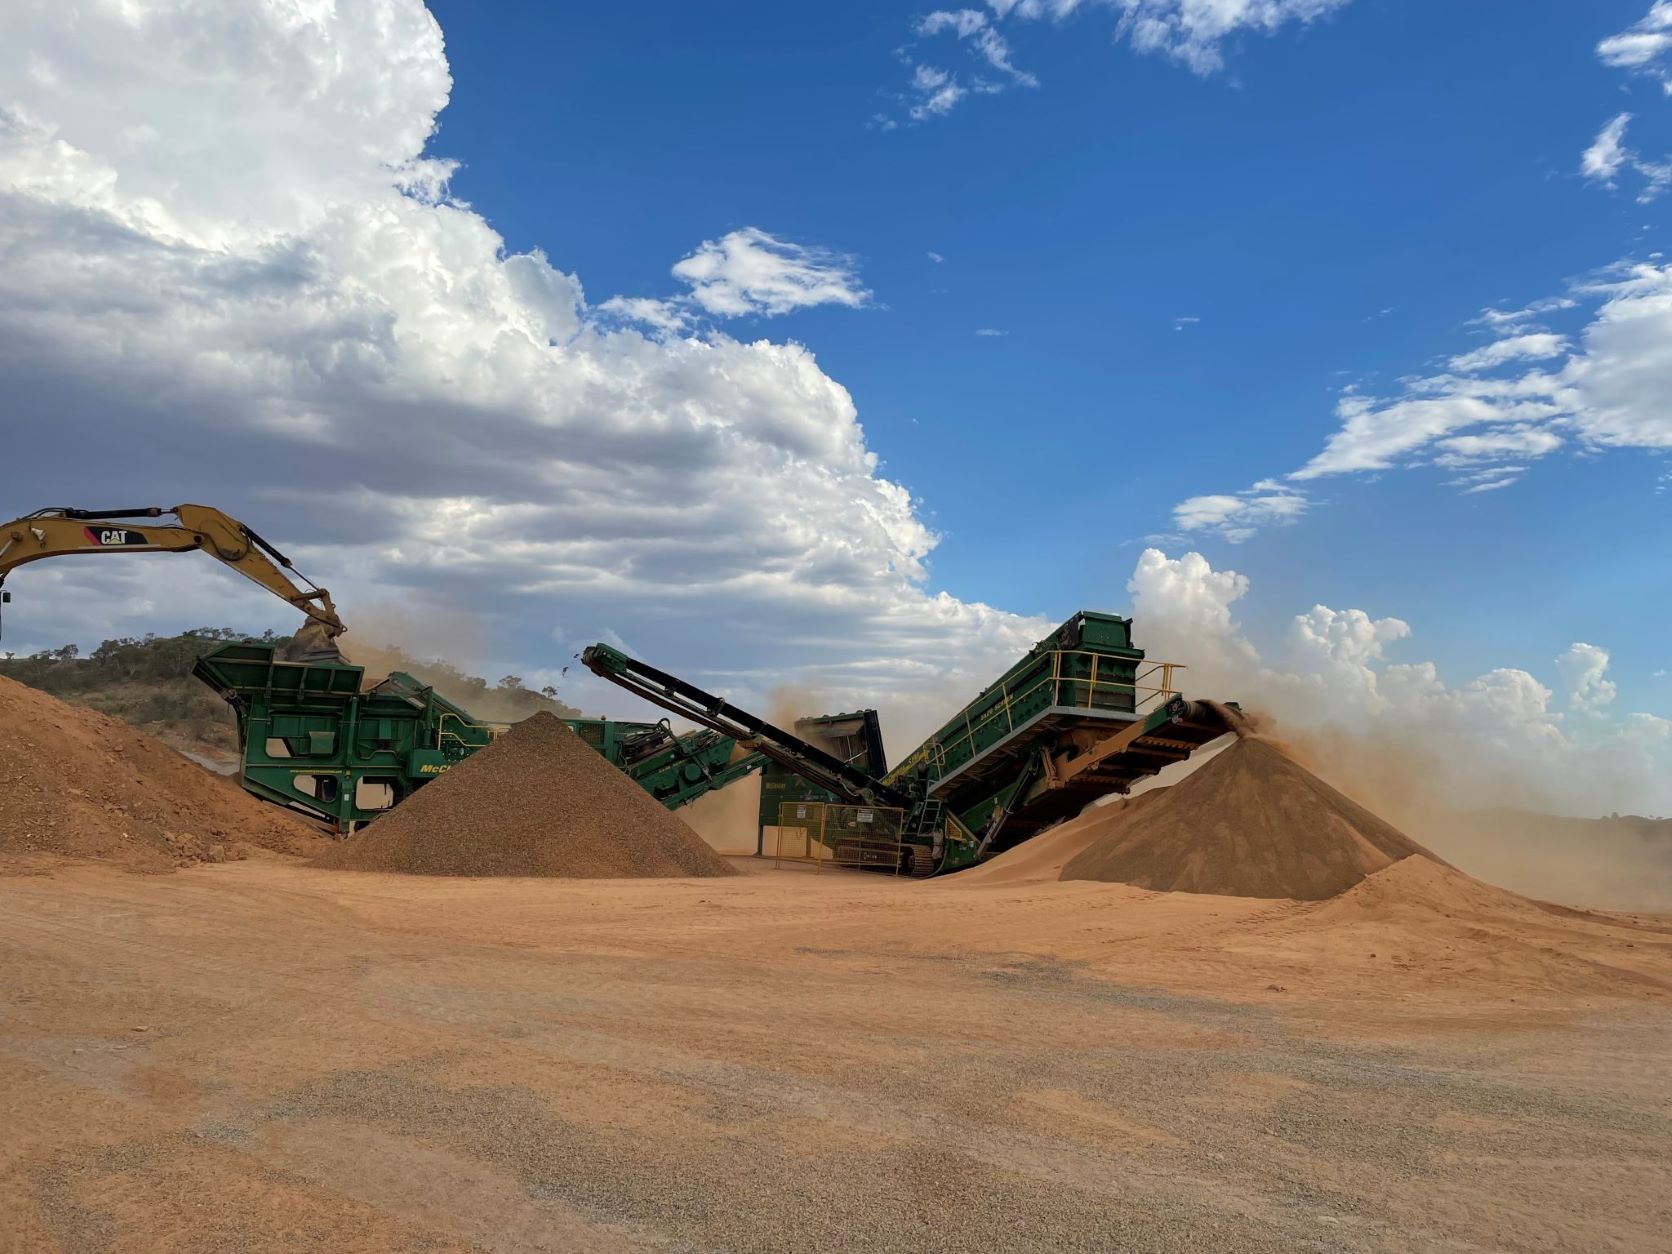 An Aussie phosphate solution for farmers